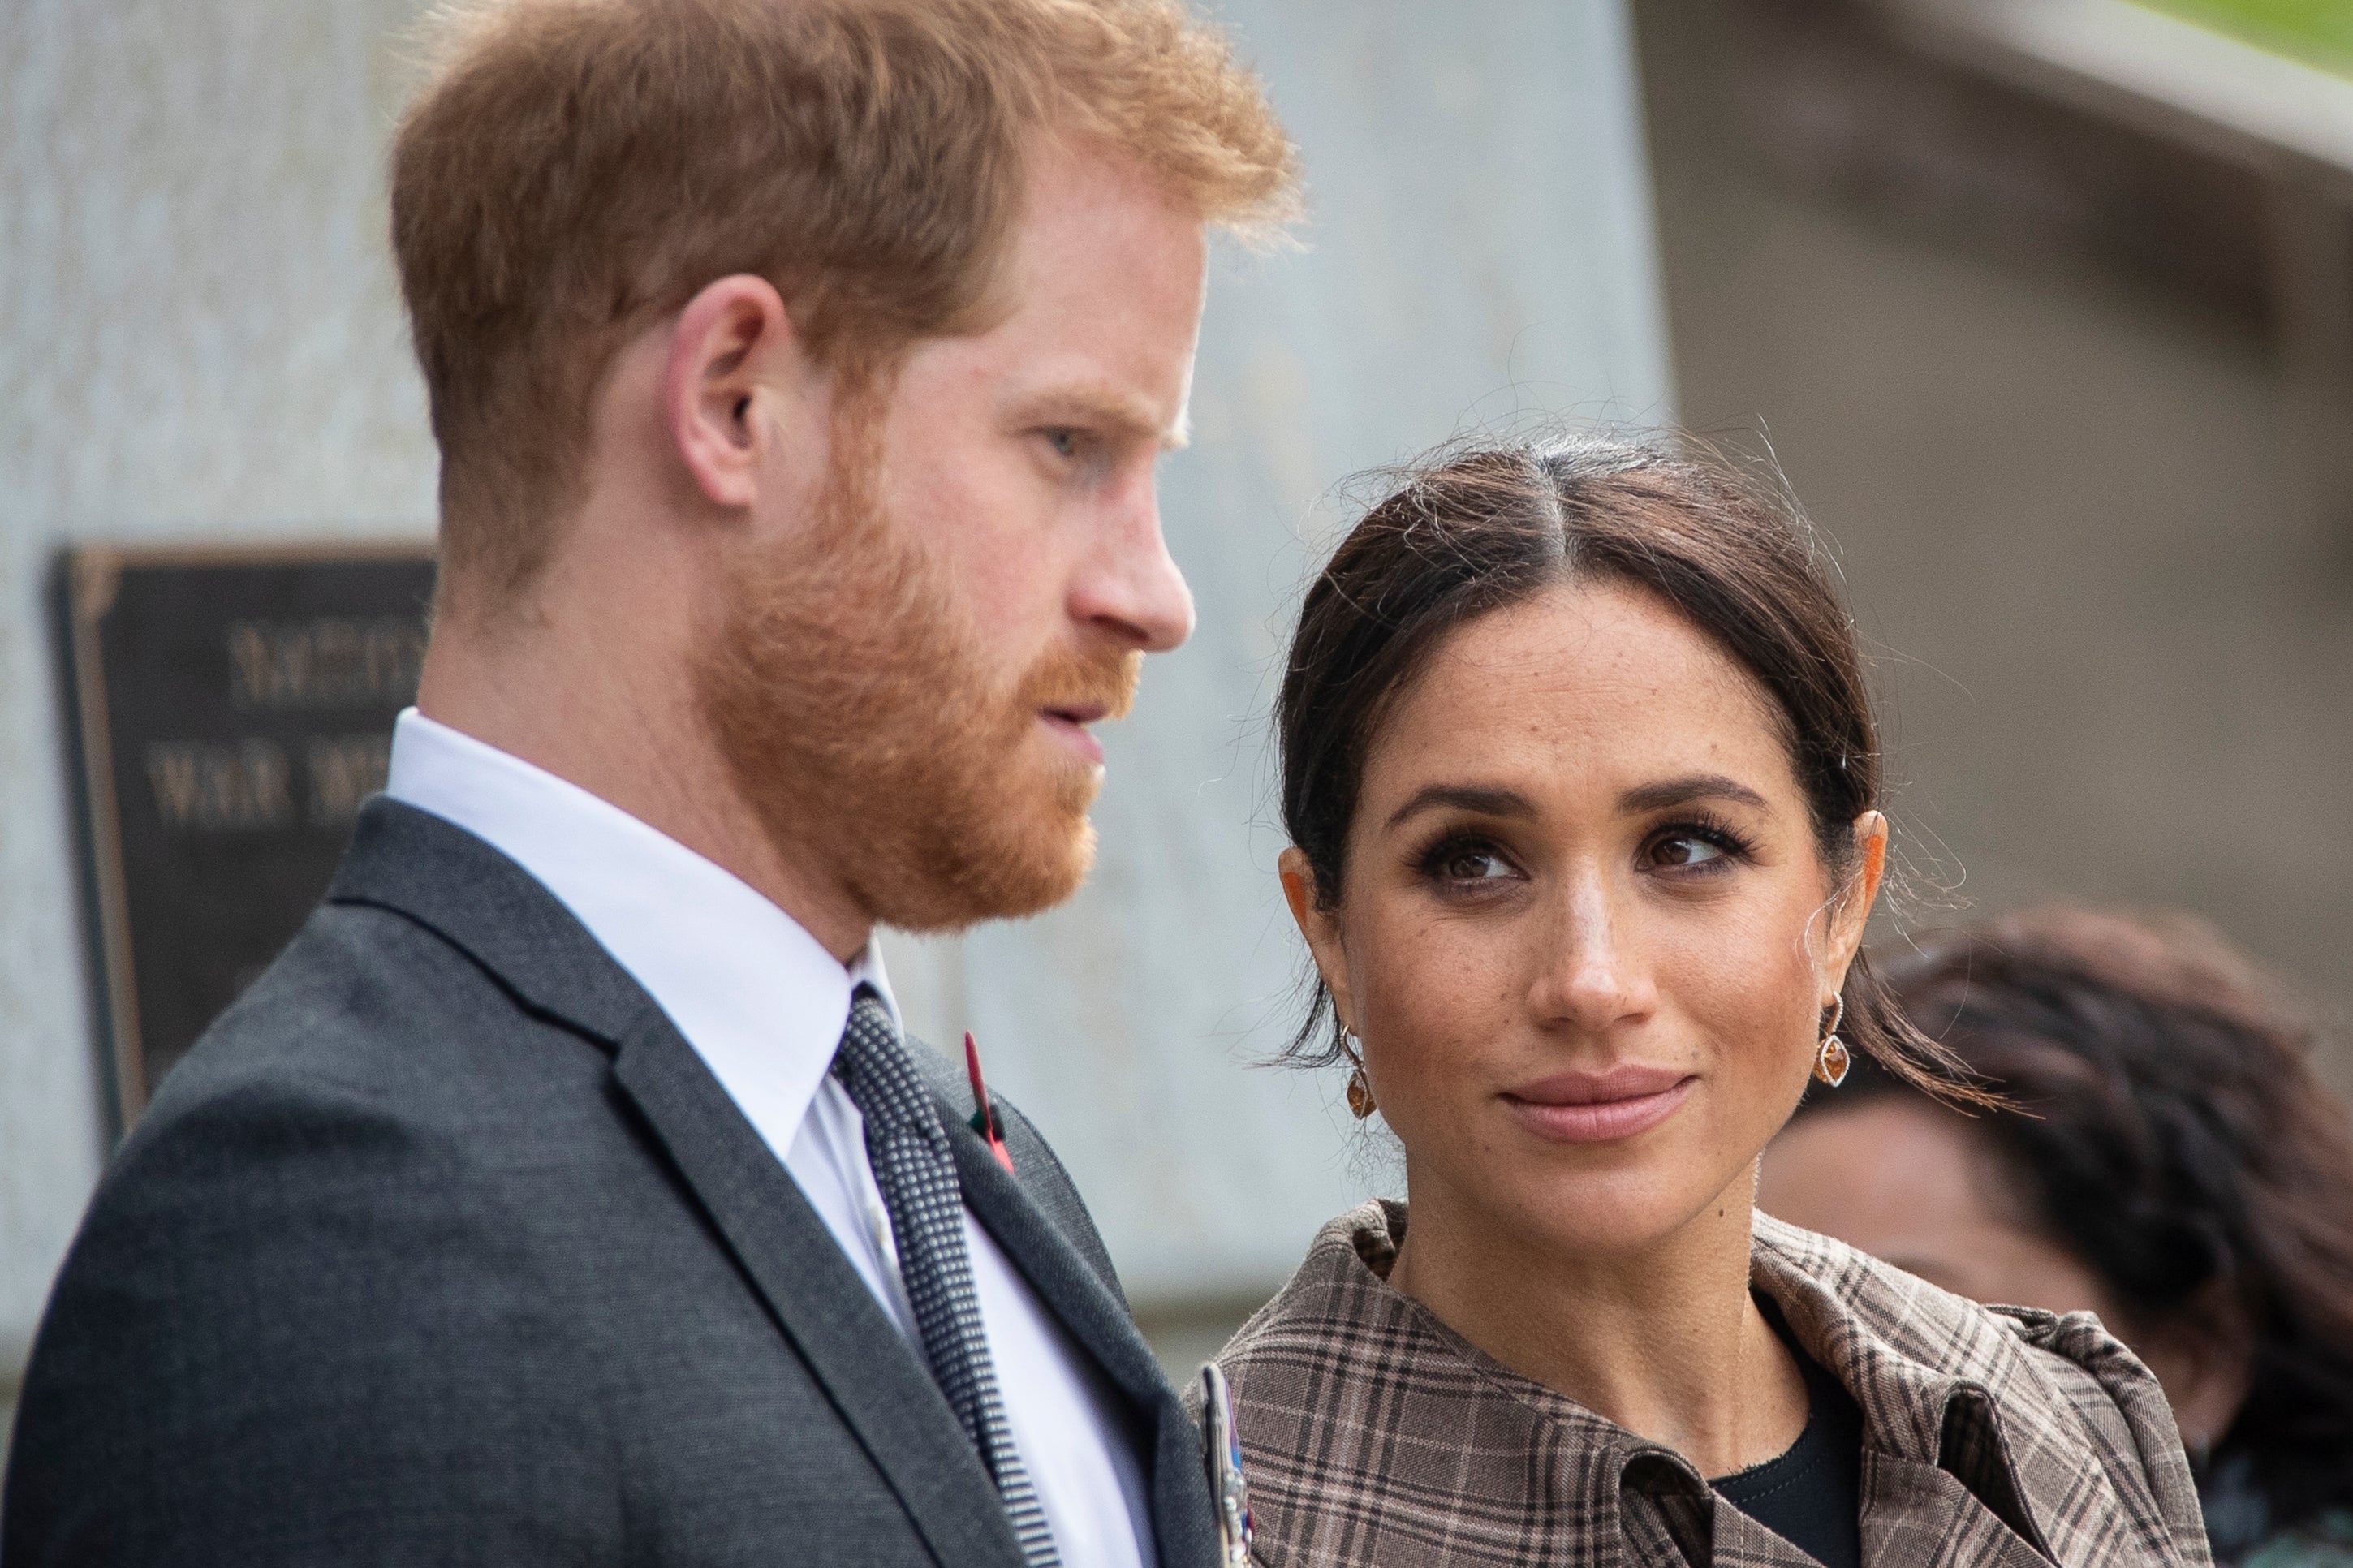 Divisive figures: Prince Harry and Meghan Markle have been known to split opinions among friends